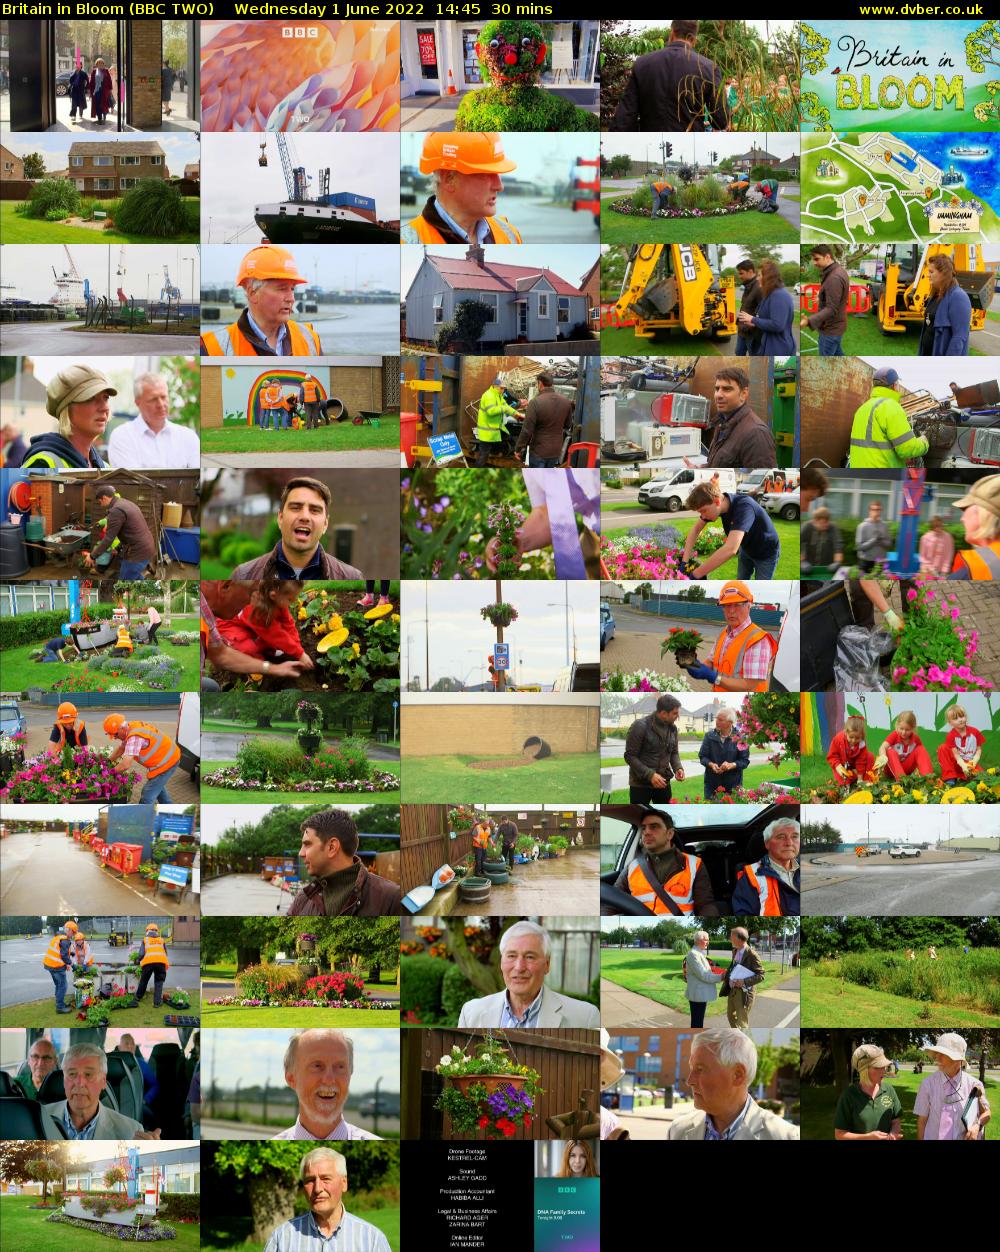 Britain in Bloom (BBC TWO) Wednesday 1 June 2022 14:45 - 15:15